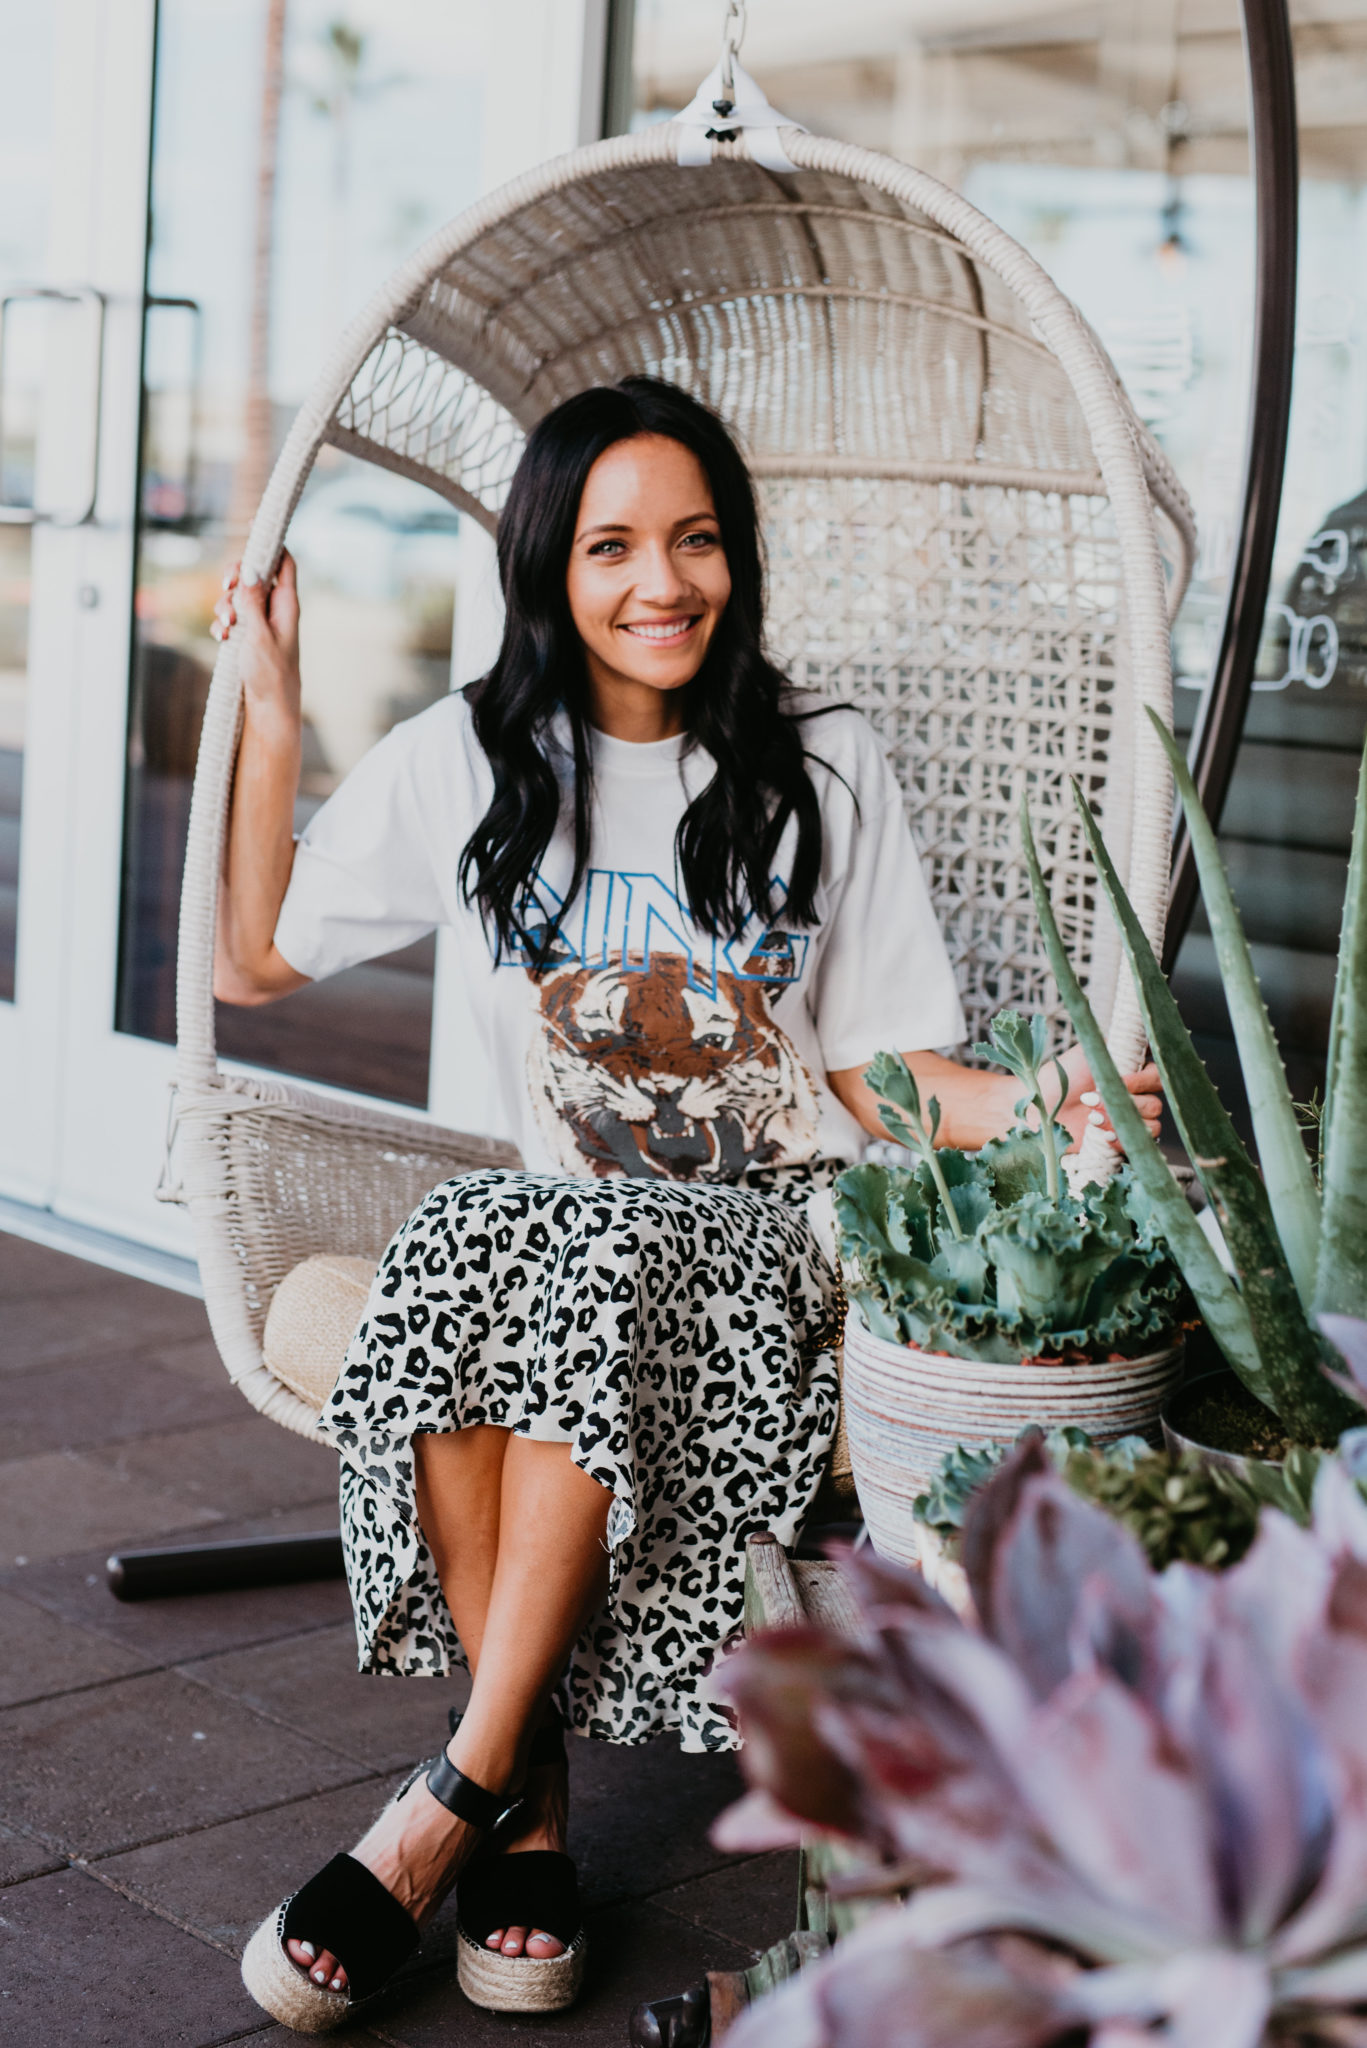 How to Wear a Graphic Tee this Fall, styling tips featured by top US fashion blog, Outfits & Outings: image of a woman wearing an Anime Bing tiger graphic tee, Aqua slip skirt, Gucci GG Marmont Matelasse, Marc Fisher platform wedge espadrilles